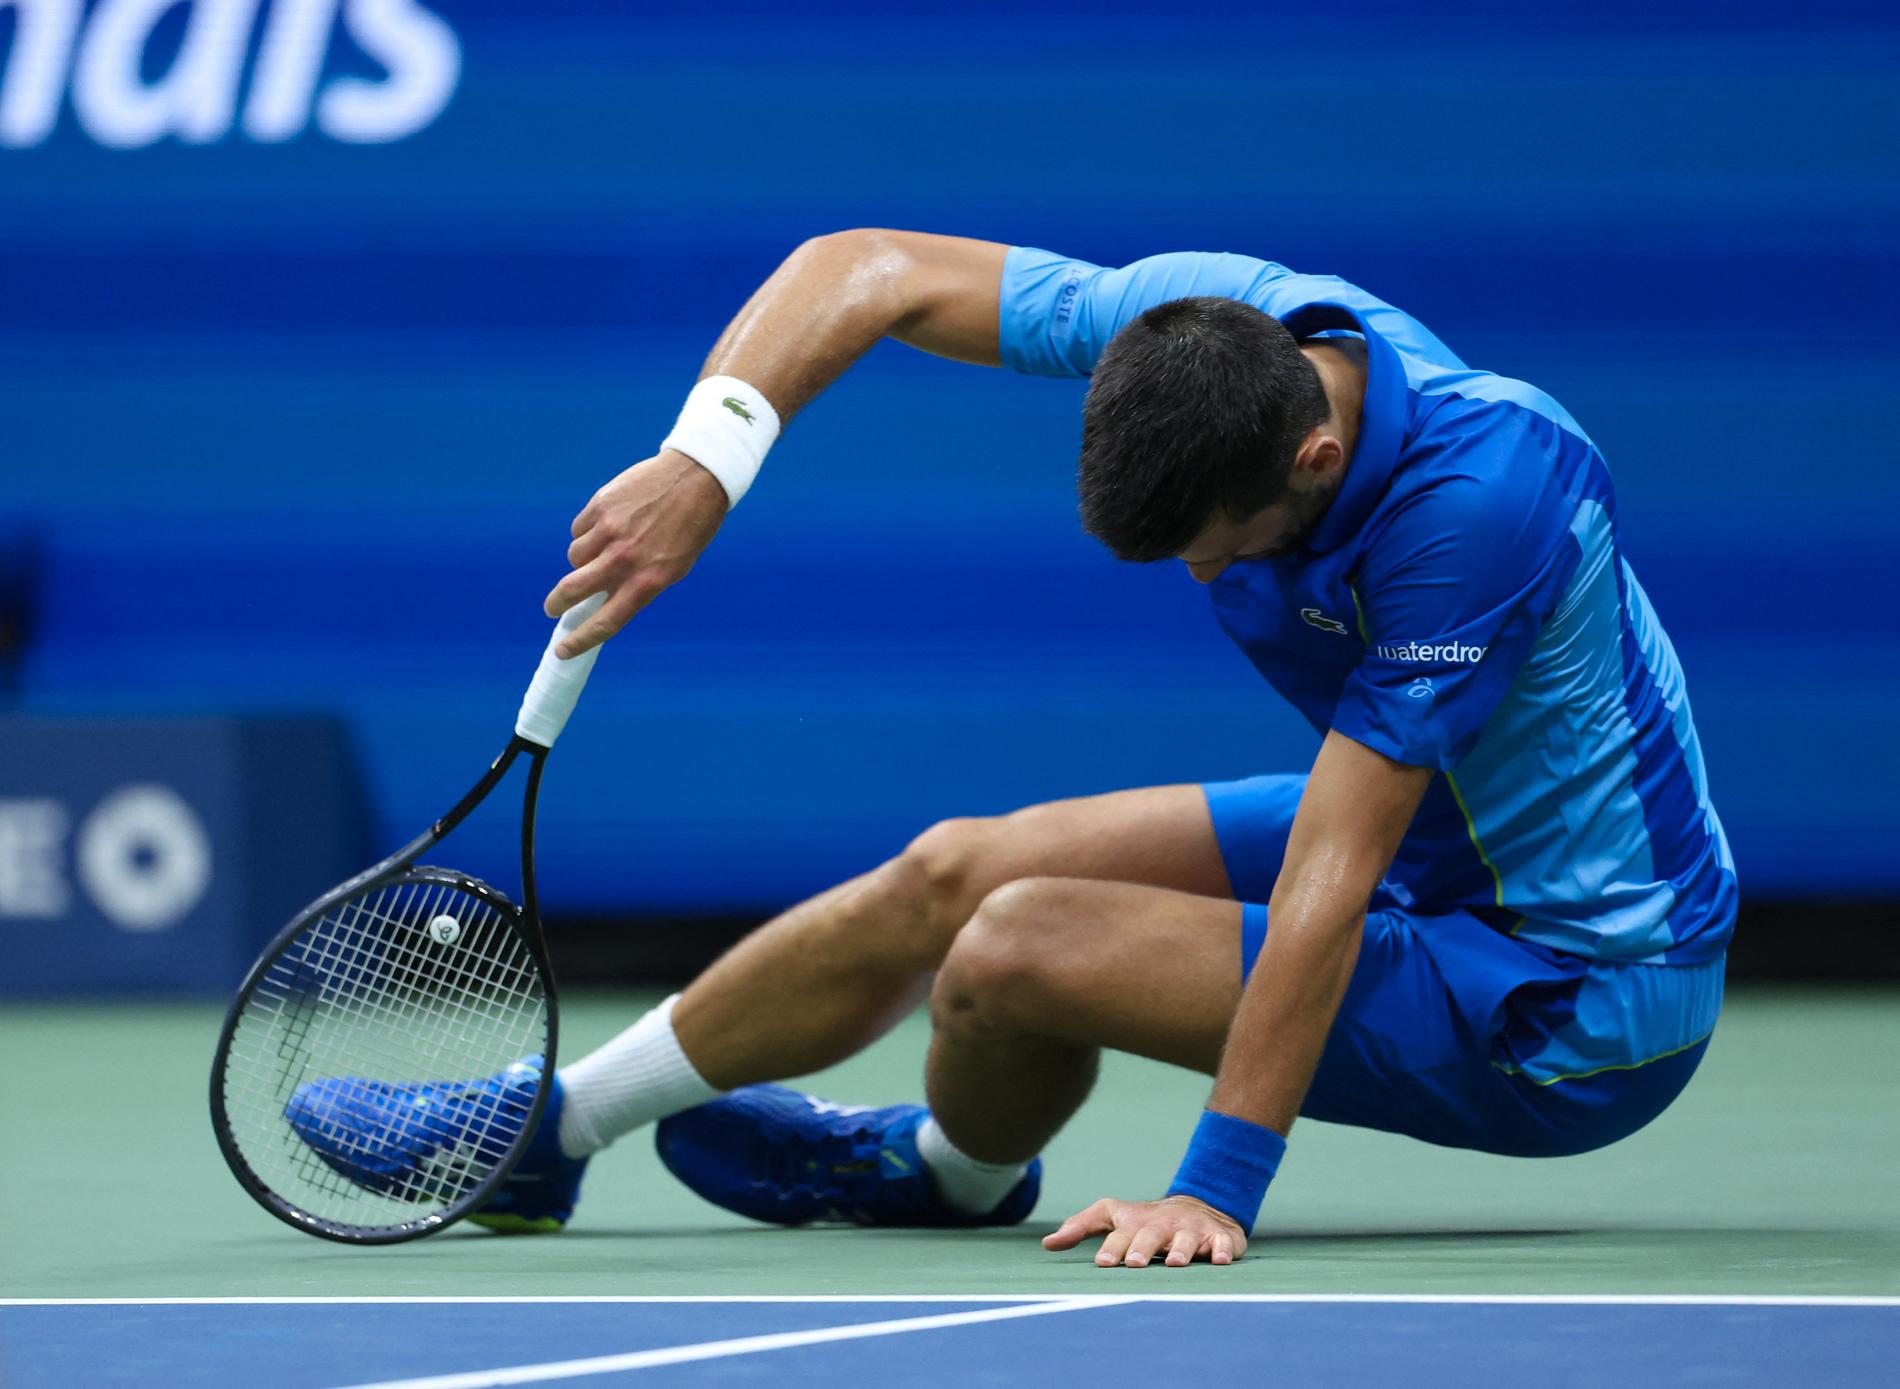 Tired: Novak Djokovic was so tired that he lay down to rest midway through the second set.